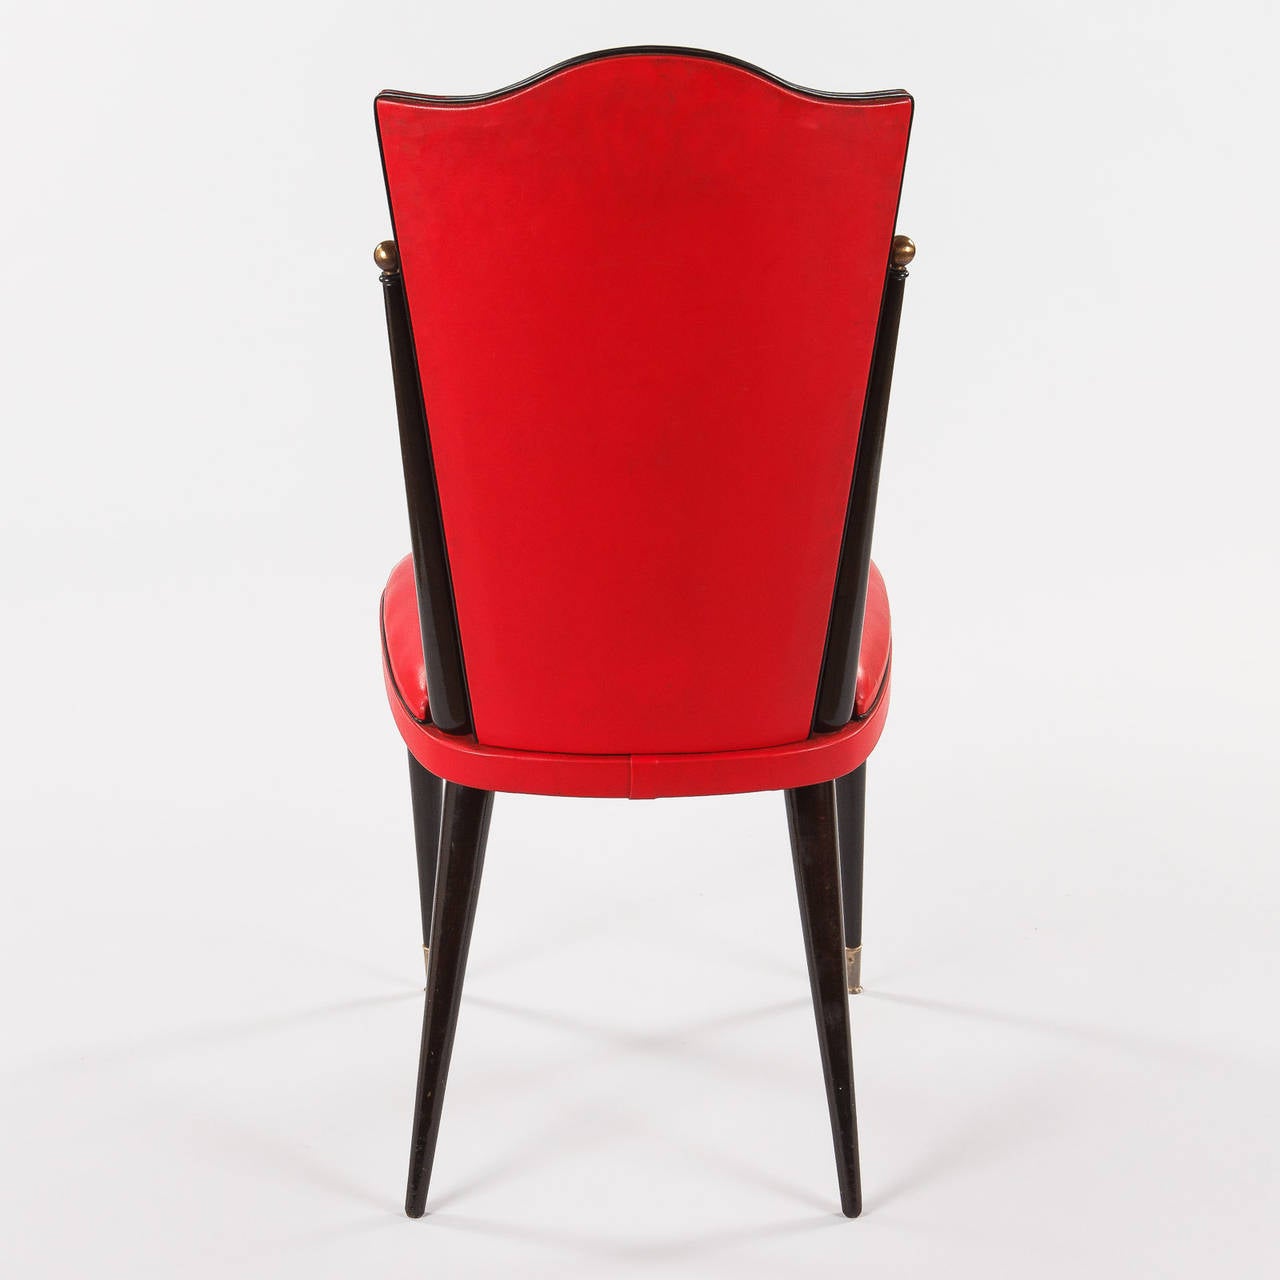 Metal Pair of Midcentury French Red Vinyl and Black Lacquered Wood Side Chairs, 1960s